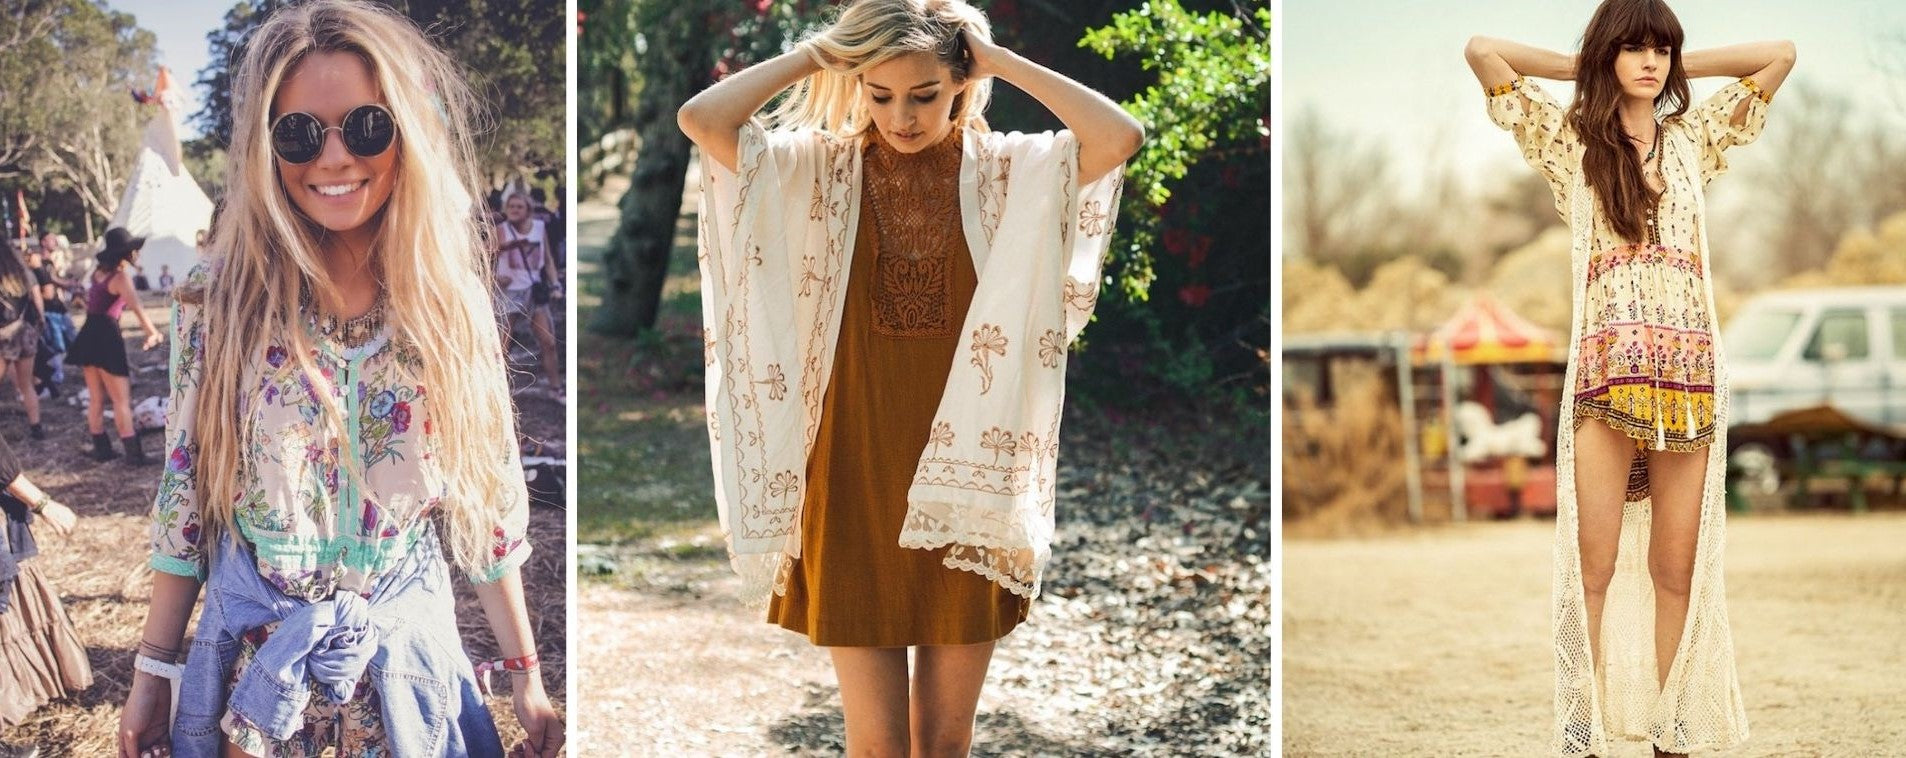 bohemian chic outfits